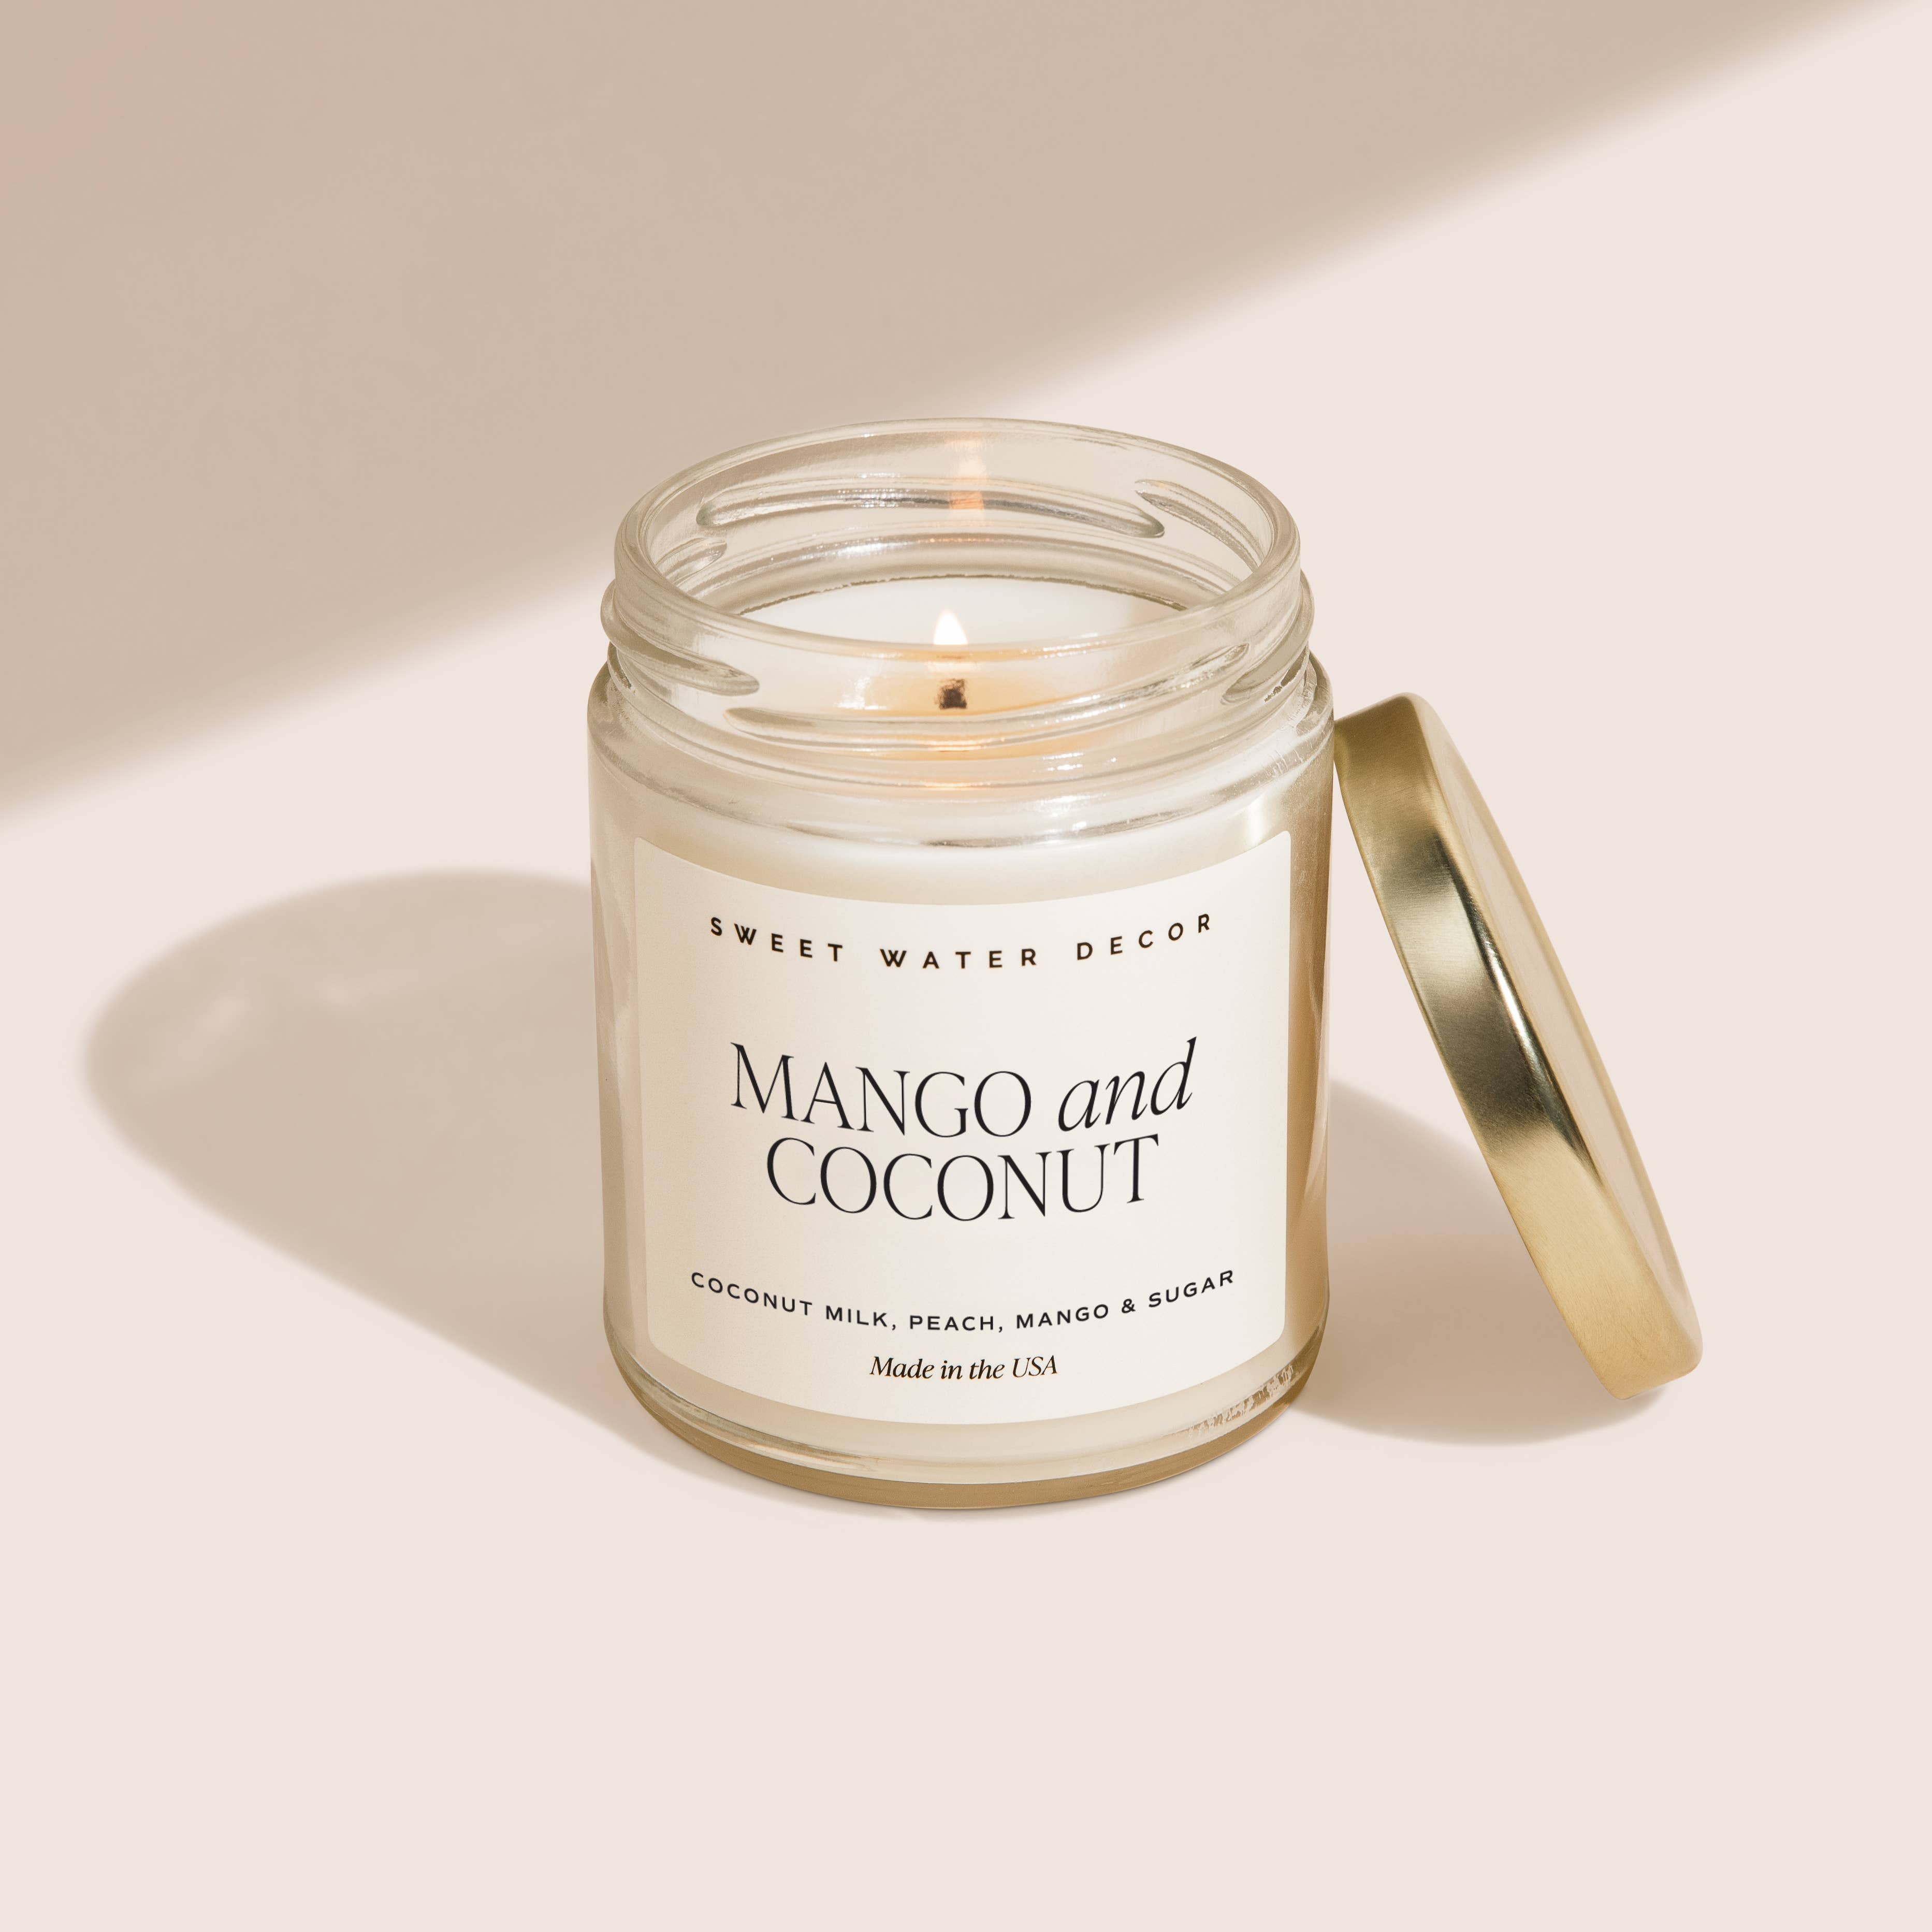 Mango and Coconut 9 oz Soy Candle - Home Decor & Gifts